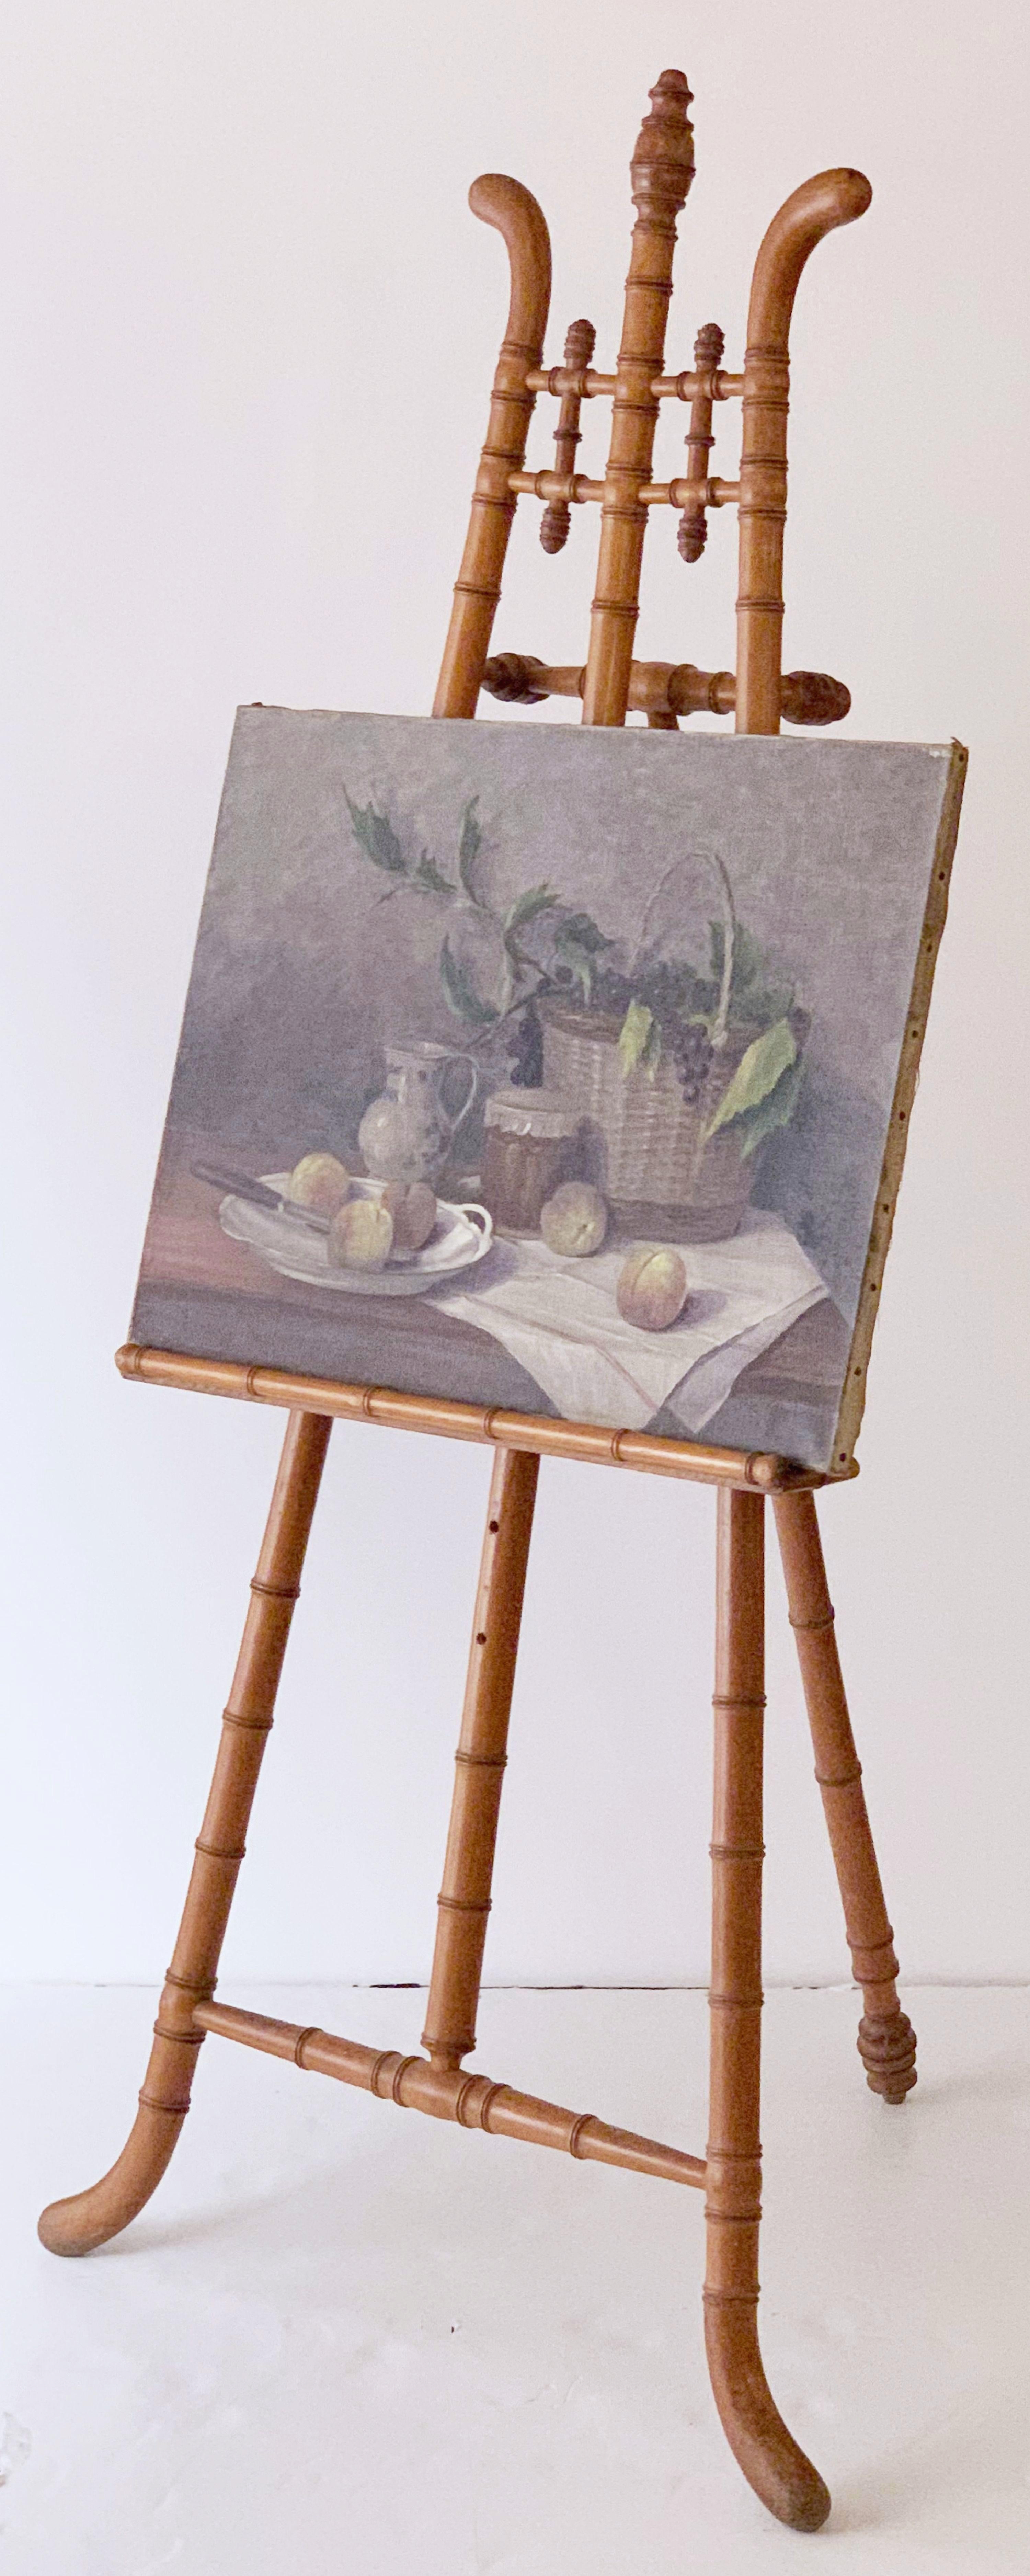 A handsome French faux bamboo display or artist's easel featuring a turned wood tripod frame with ornamental bamboo styling. 

The back leg with adjustable arm and locking wingnut. 

The cross bar support rest (for the artwork) adjustable